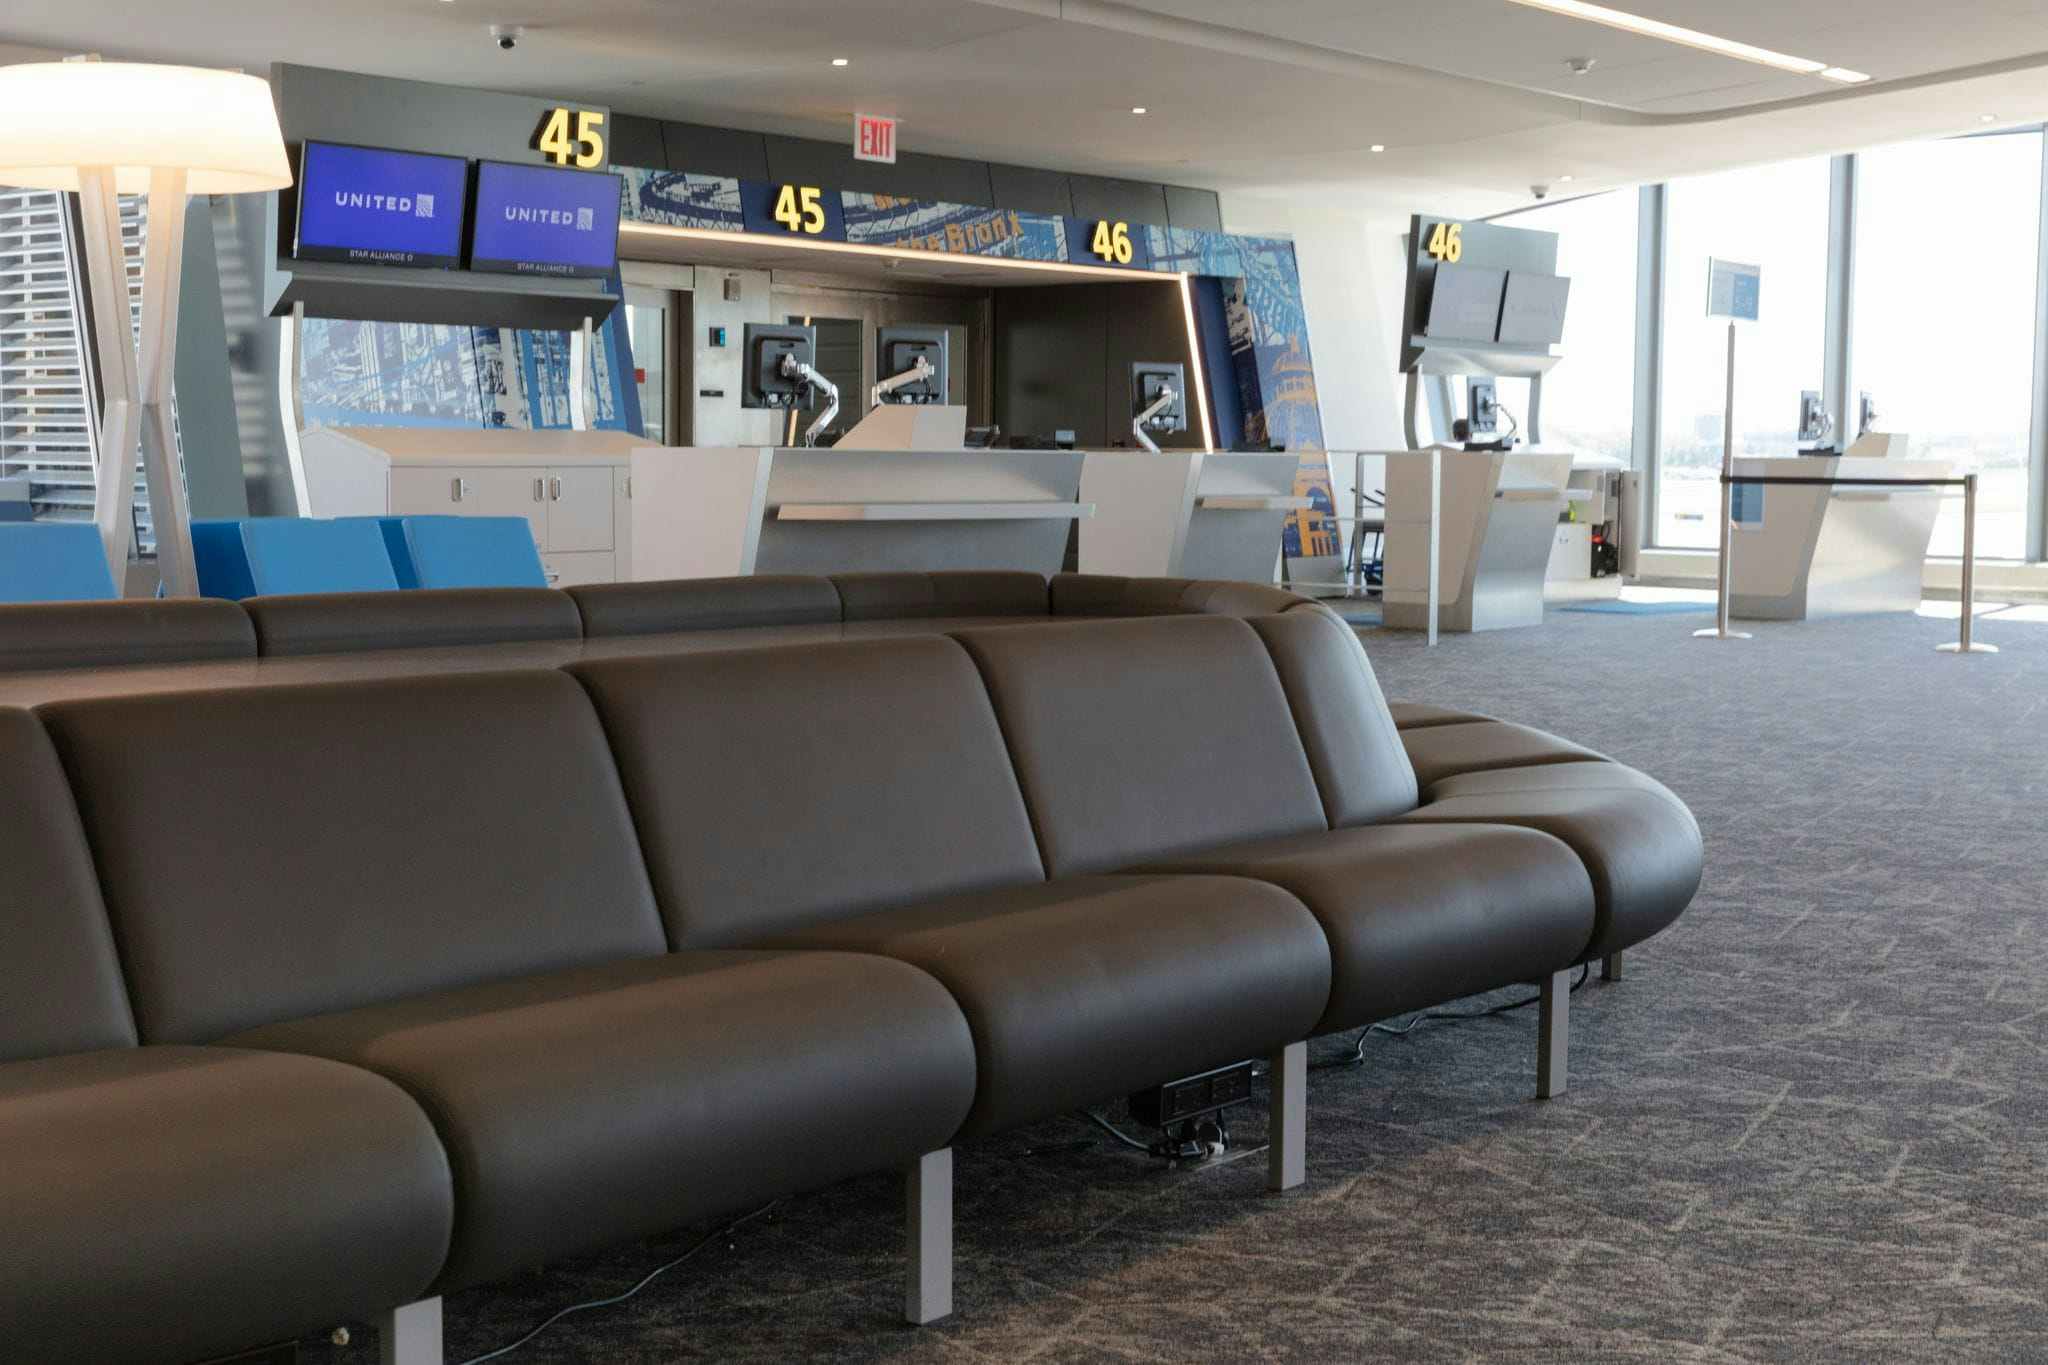 United Airlines gate seating area